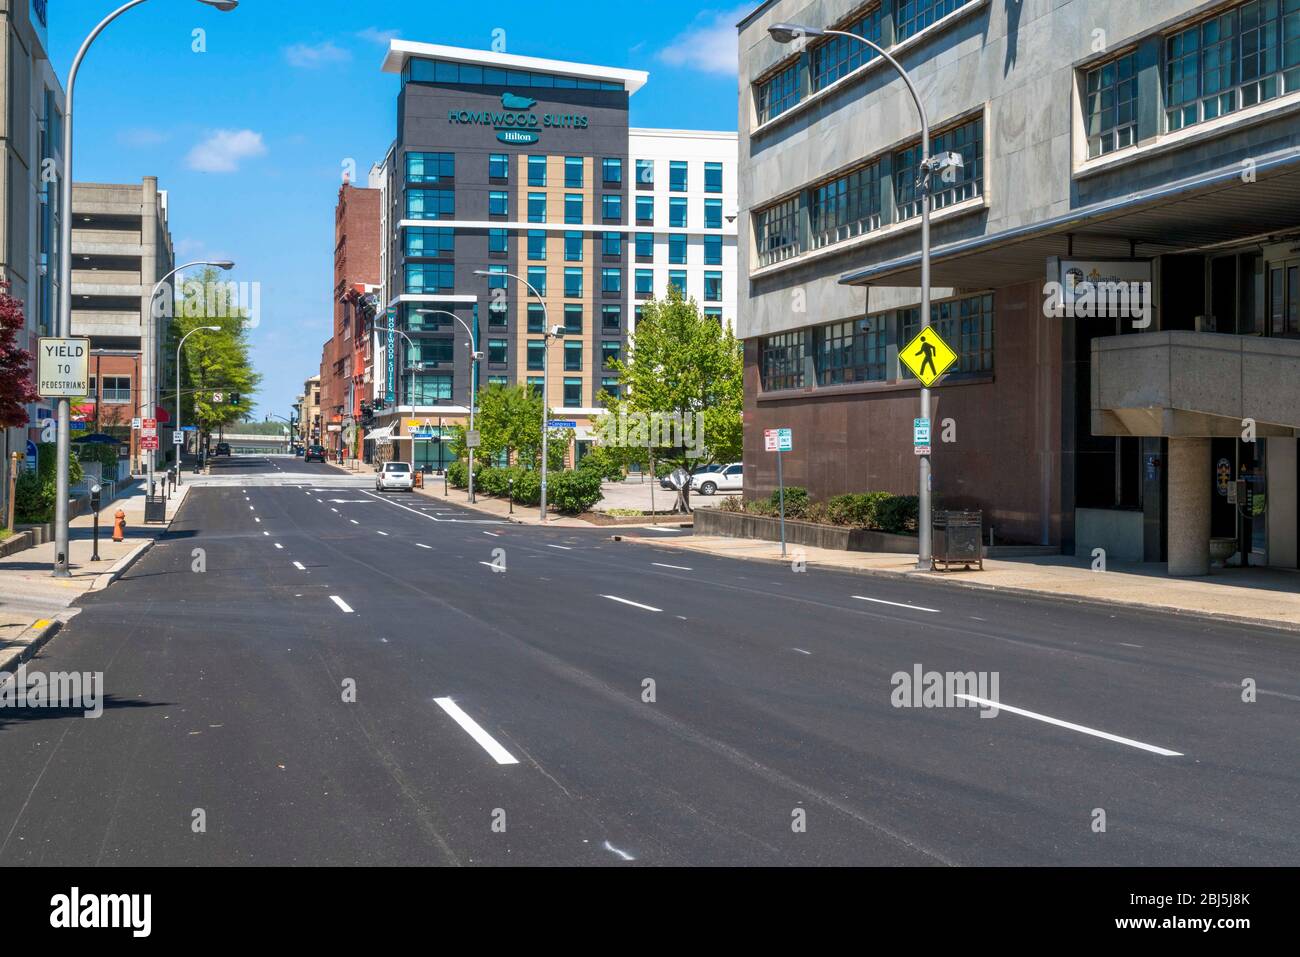 Street view during the Novel Virus COVID-19 and Kentucky Governor Andy Beshear's lockdown order empties downtown pictured on April 17, 2020 in Louisville, Kentucky. Stock Photo